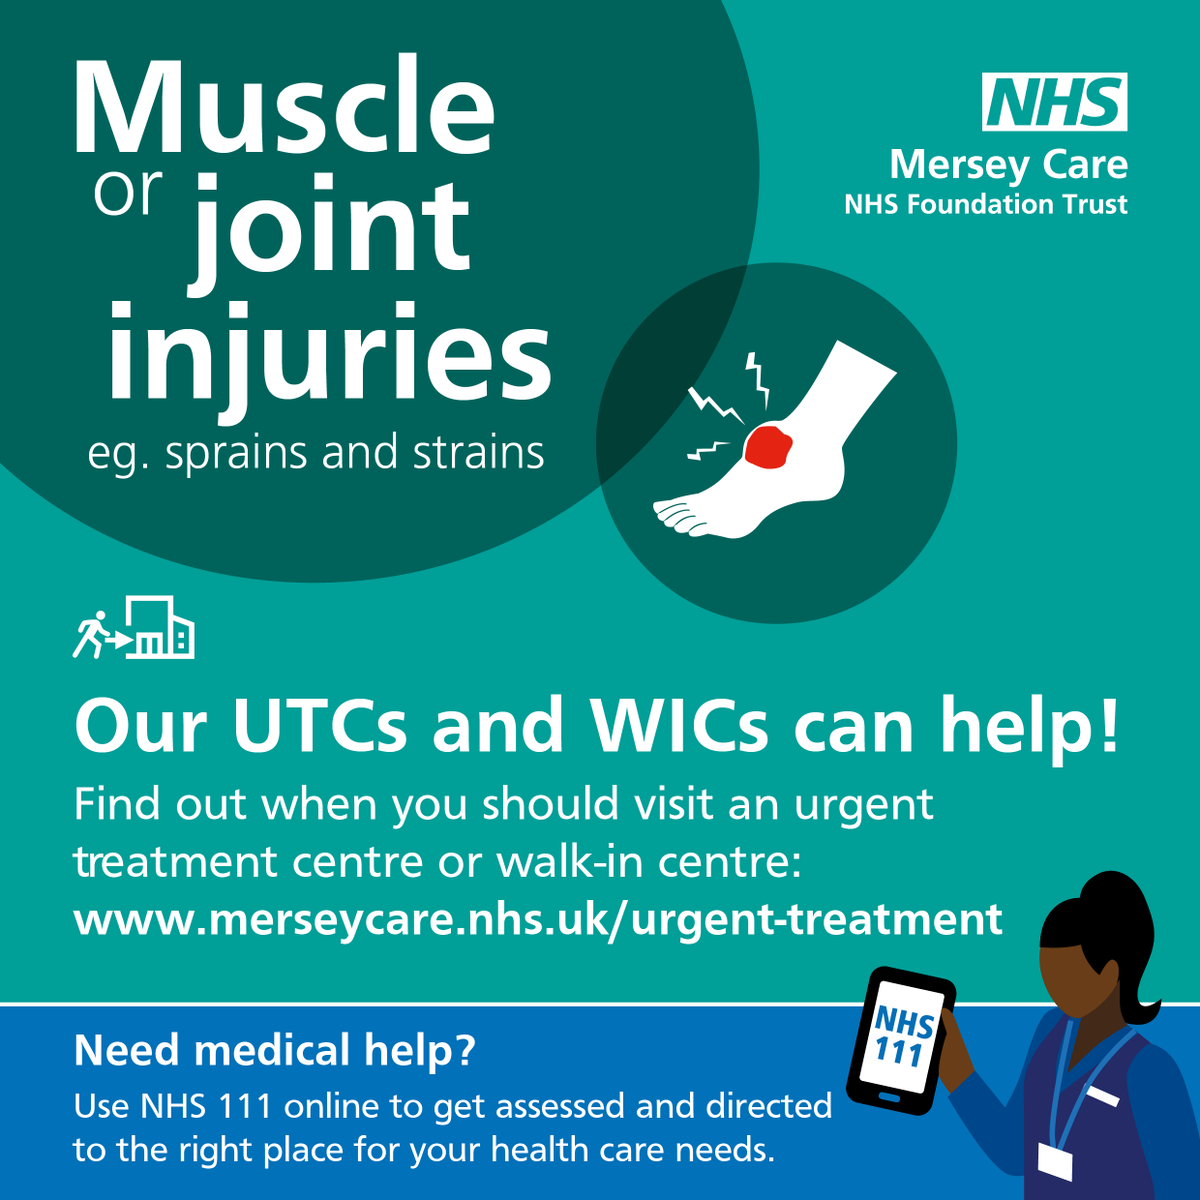 Our Urgent Treatment Centres #UTCs and walk-in centres #WICs across #Knowsley, #Liverpool and #Sefton are there to help you and your family this #BankHoliday #Weekend 💙 ⚠ For same day urgent care, contact #NHS111 online ⚠ merseycare.nhs.uk/walk-in-centres